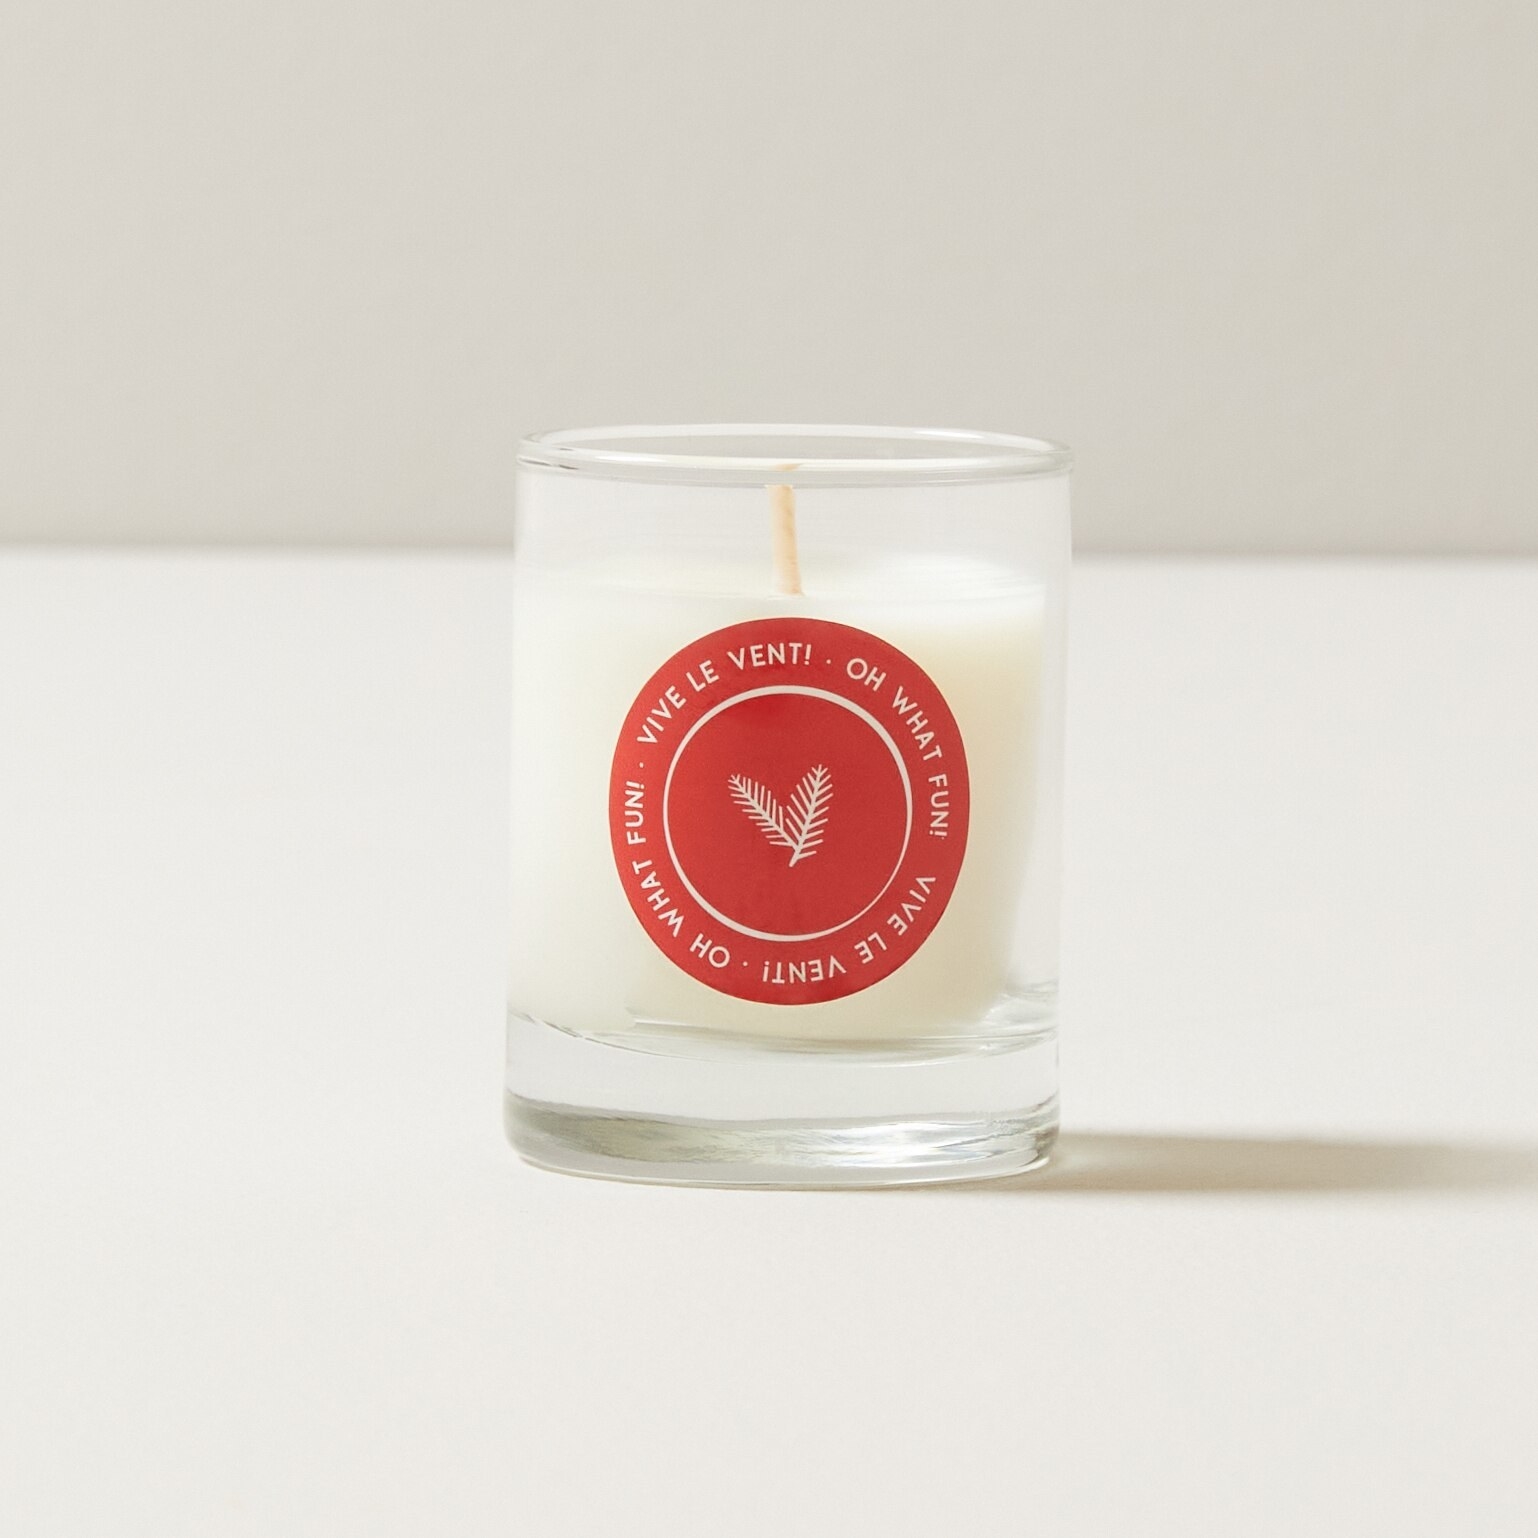 A candle in a small glass jar